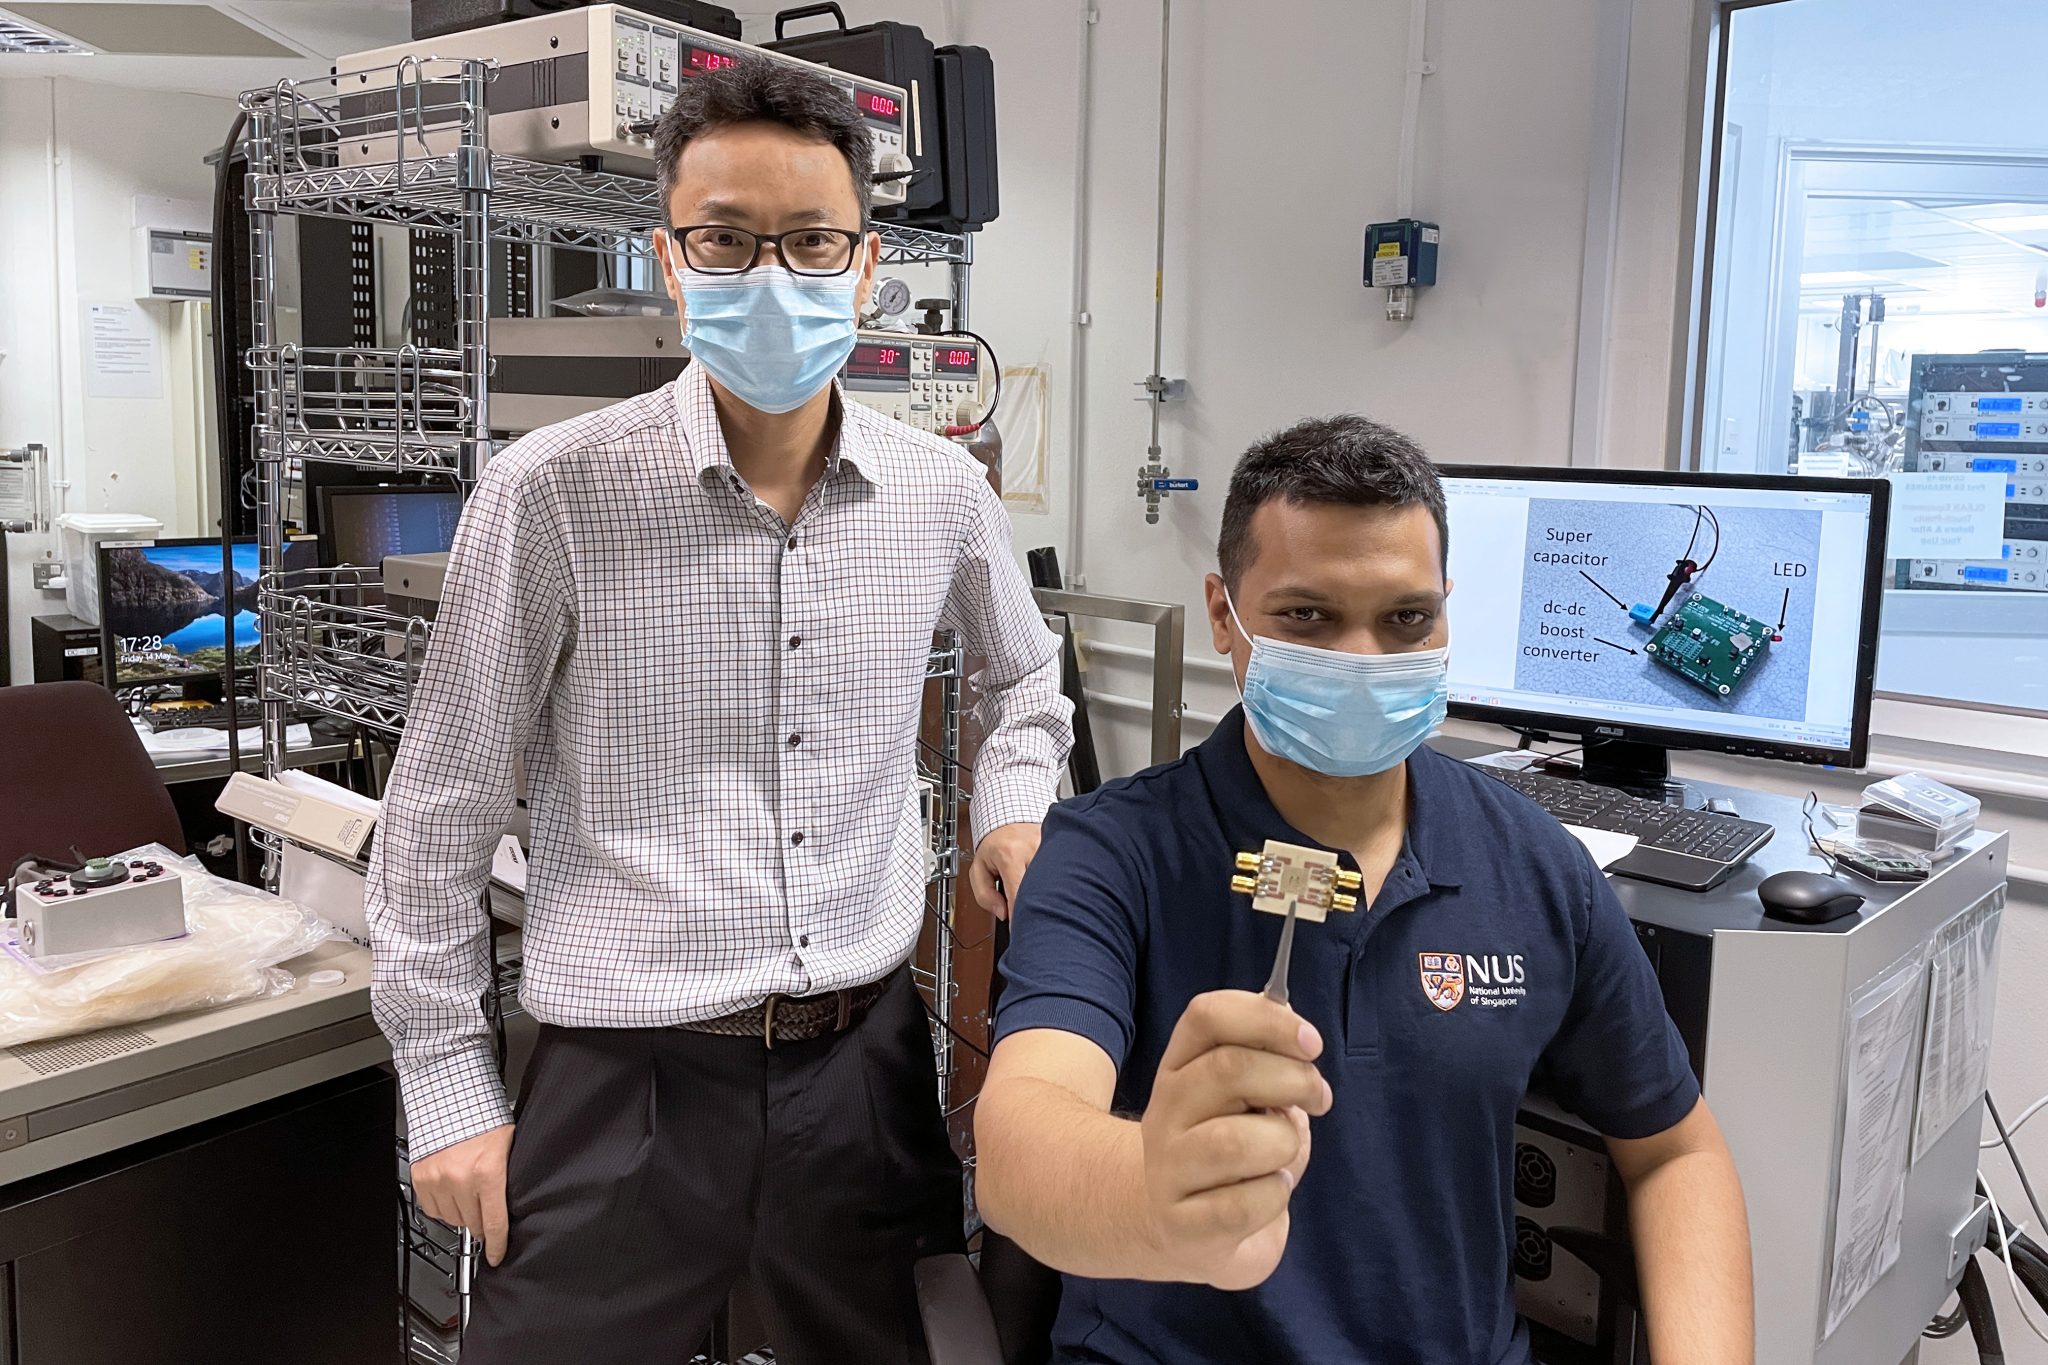 The research breakthrough was achieved by a team led by Professor Yang Hyunsoo (left) with Dr Raghav Sharma (right).